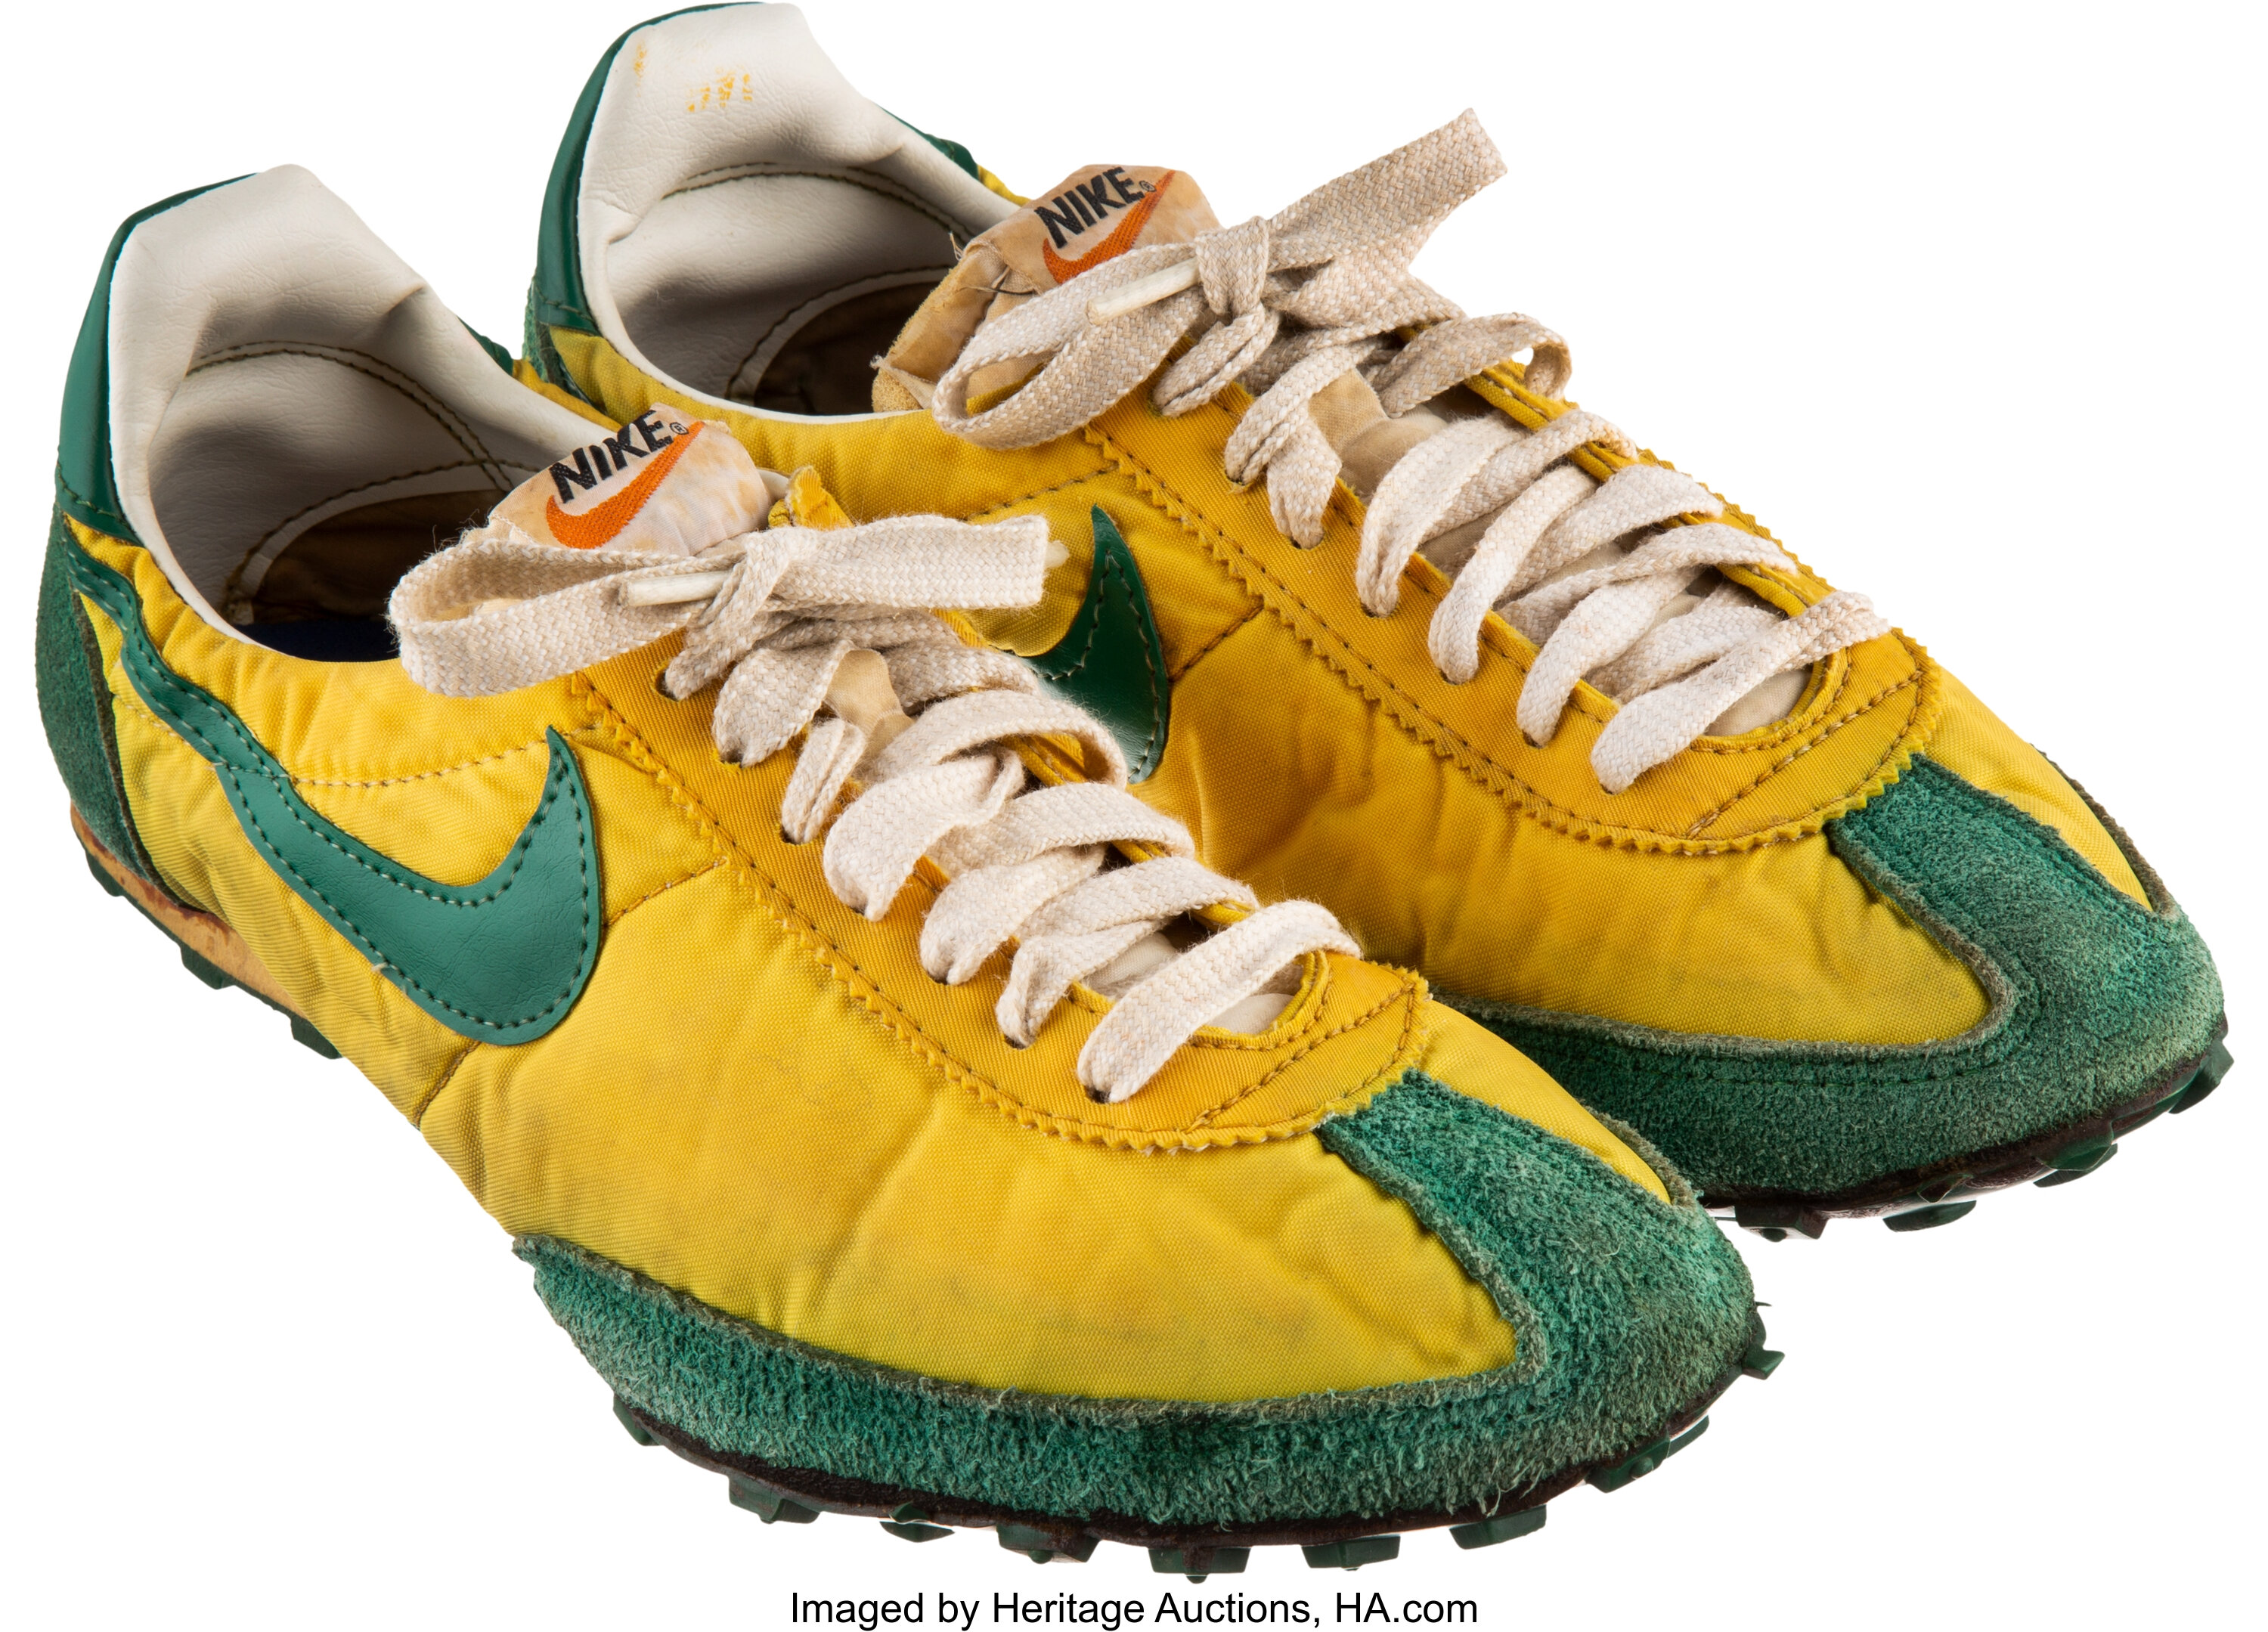 Descifrar Poder Hablar 1974 Original Nike "Waffle Trainers" Sneakers.... Miscellaneous | Lot  #50992 | Heritage Auctions